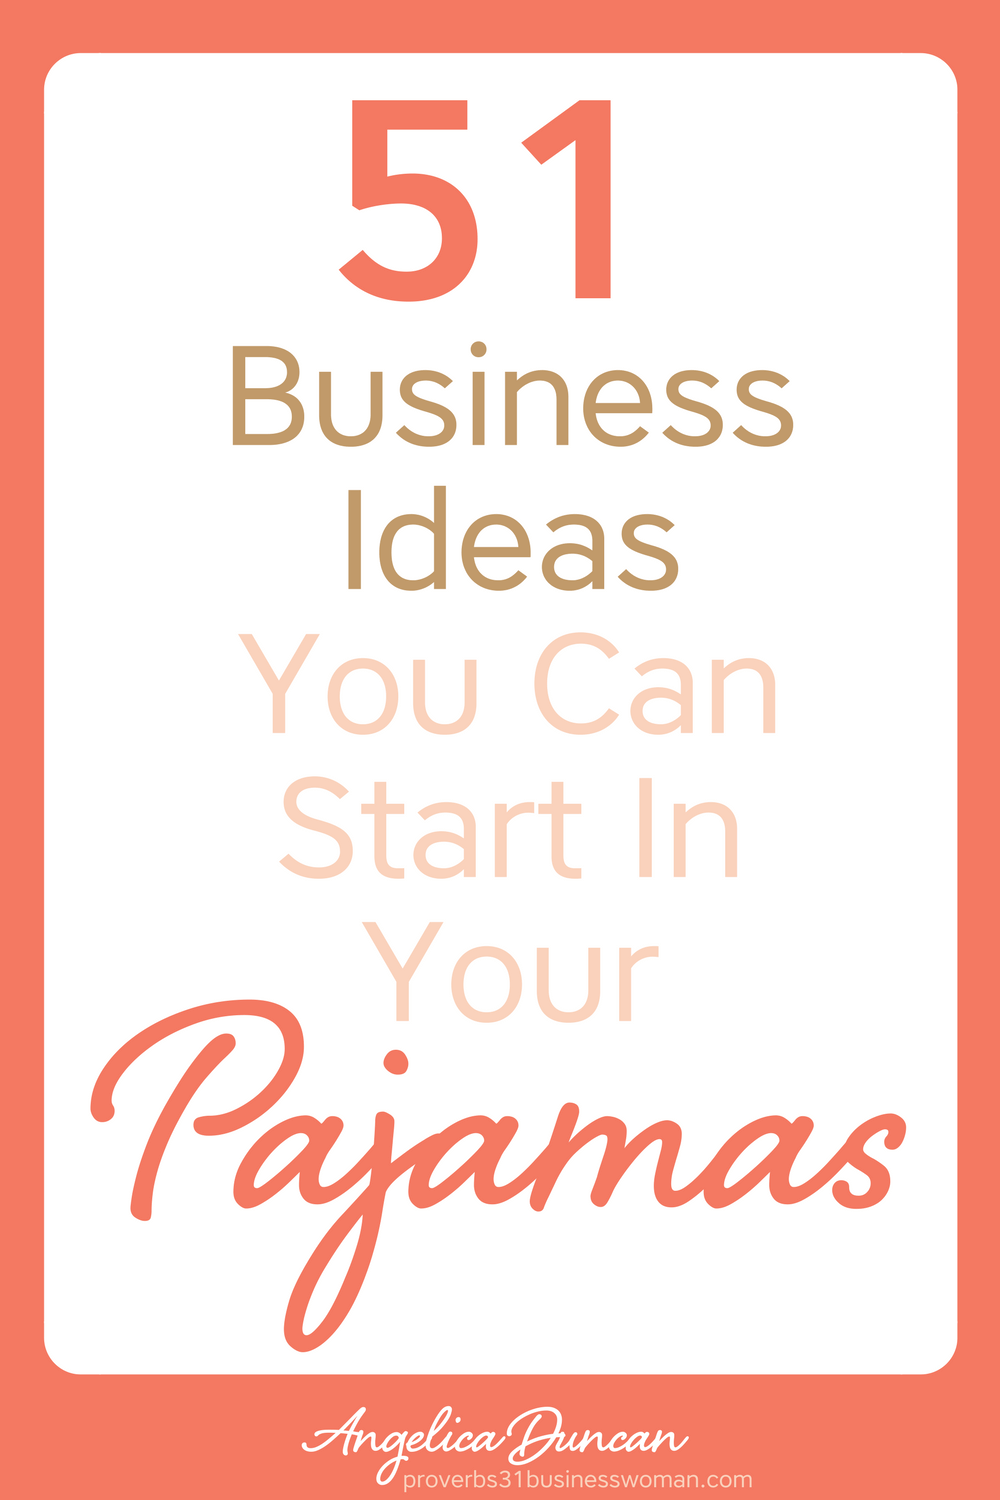 Need A Business Idea? Here are 51! Start your business by Monday...in your pajamas! #mompreneur #onlinebusiness #wahm #womeninbusiness #christianbusiness #christianwomeninbusiness #christianentrepreneurs #proverbs31 #proverbs31woman #proverbs31businesswoman #proverbs31enrepreneur #p31 #angelicaduncan #silkoversteel #sos